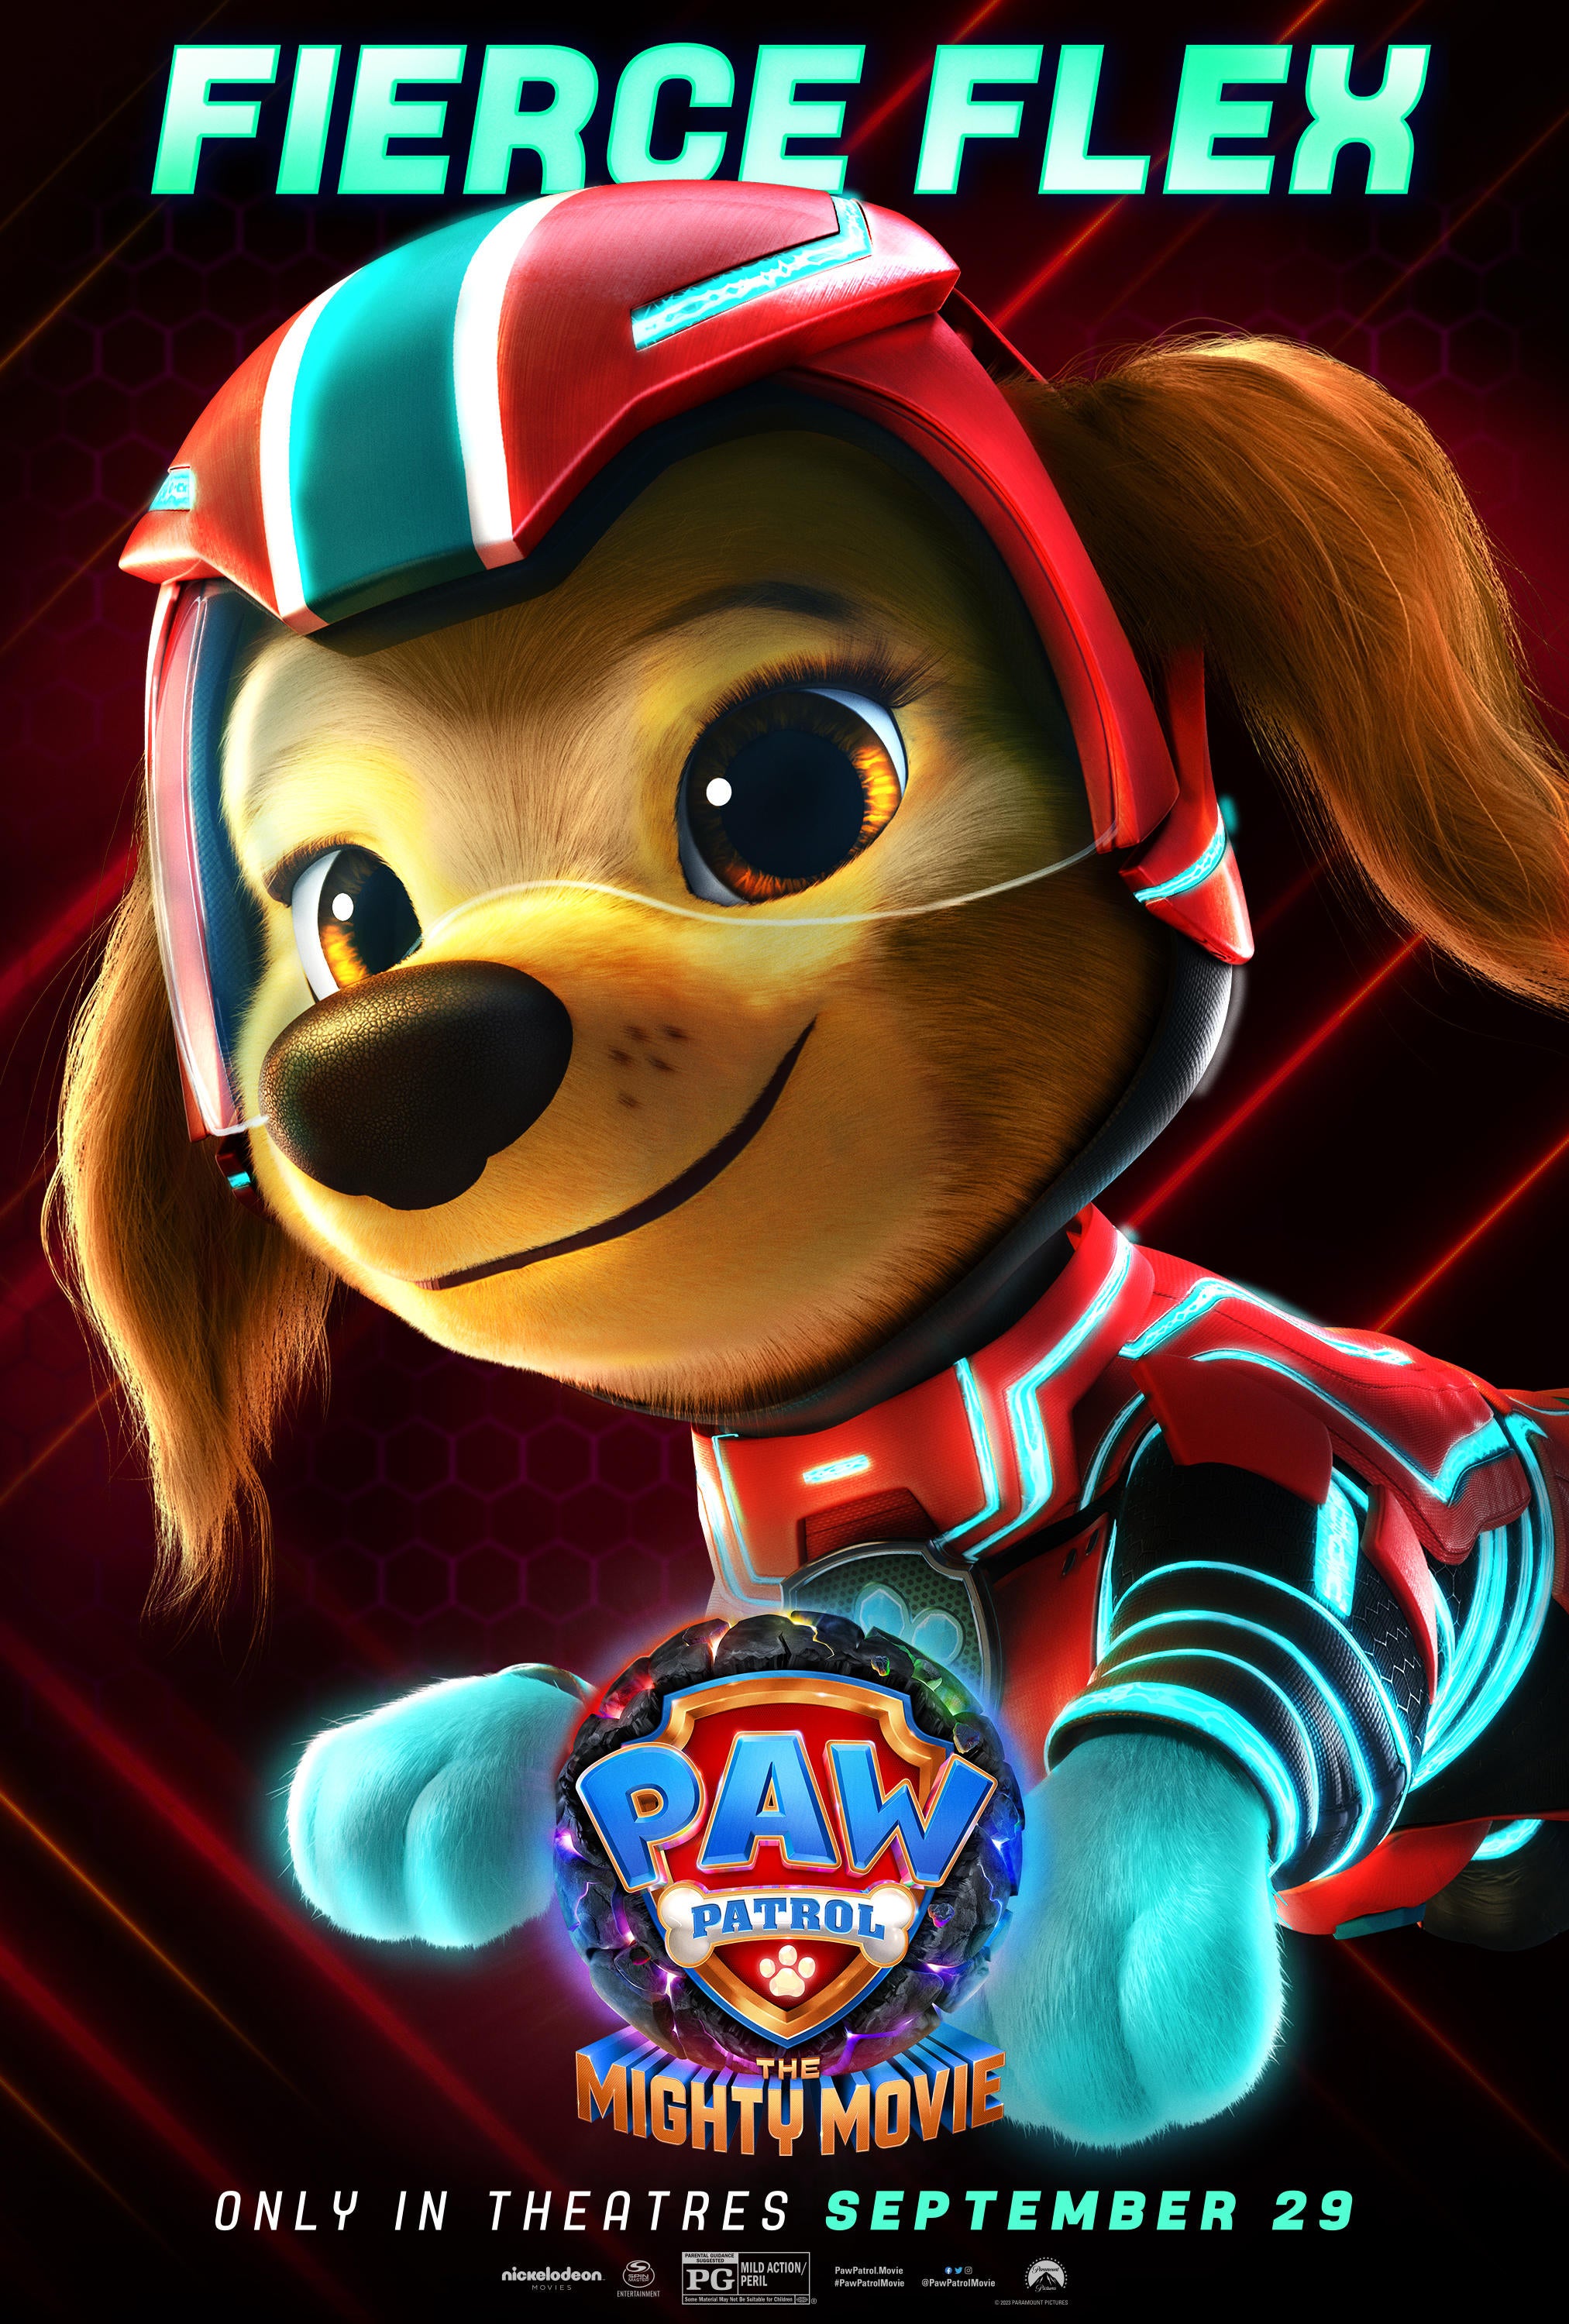 PAW Patrol: The Mighty Movie Character Posters: Liberty